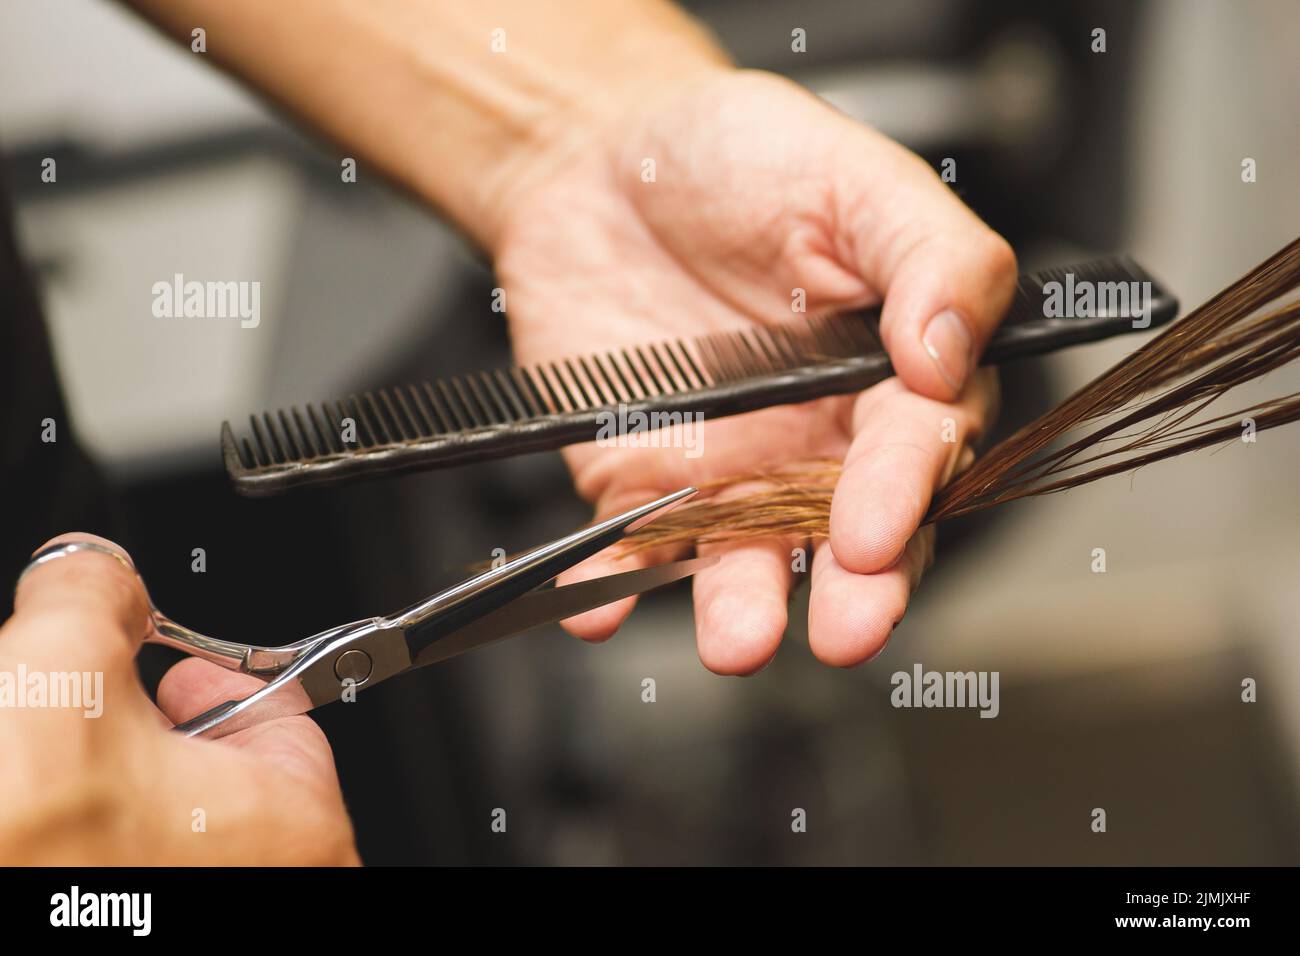 Hairdresser male hands during cutting female hair Stock Photo